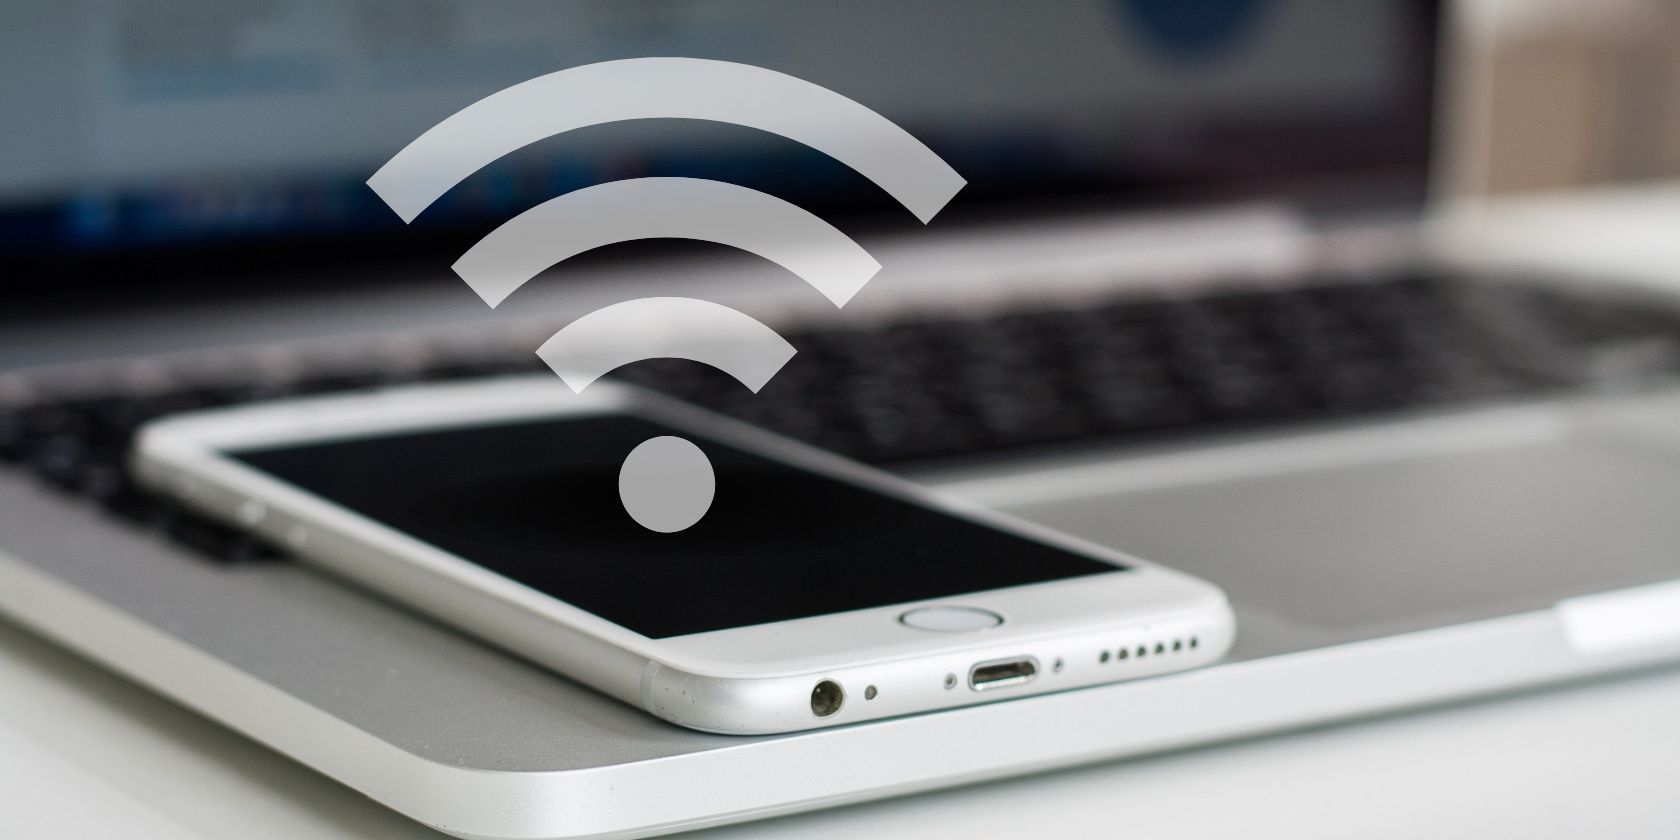 Connecting To Phone Hotspot: Quick Instructions